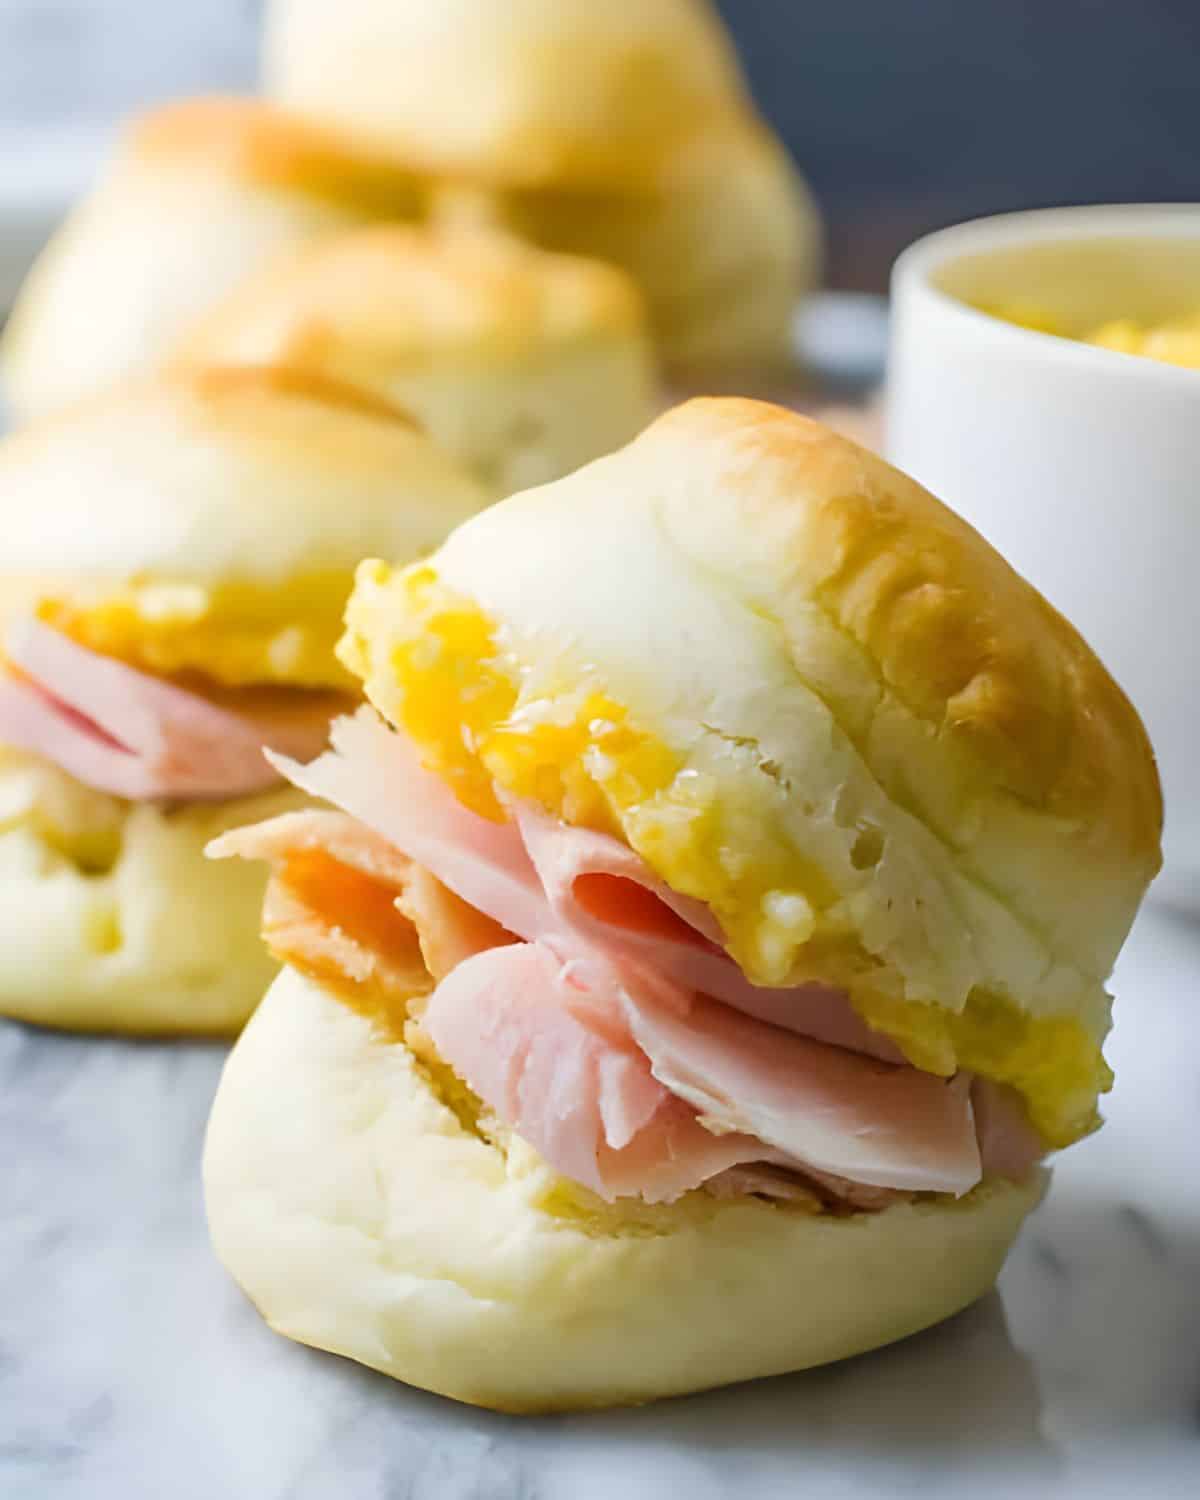 Country ham biscuits with apricot butter.